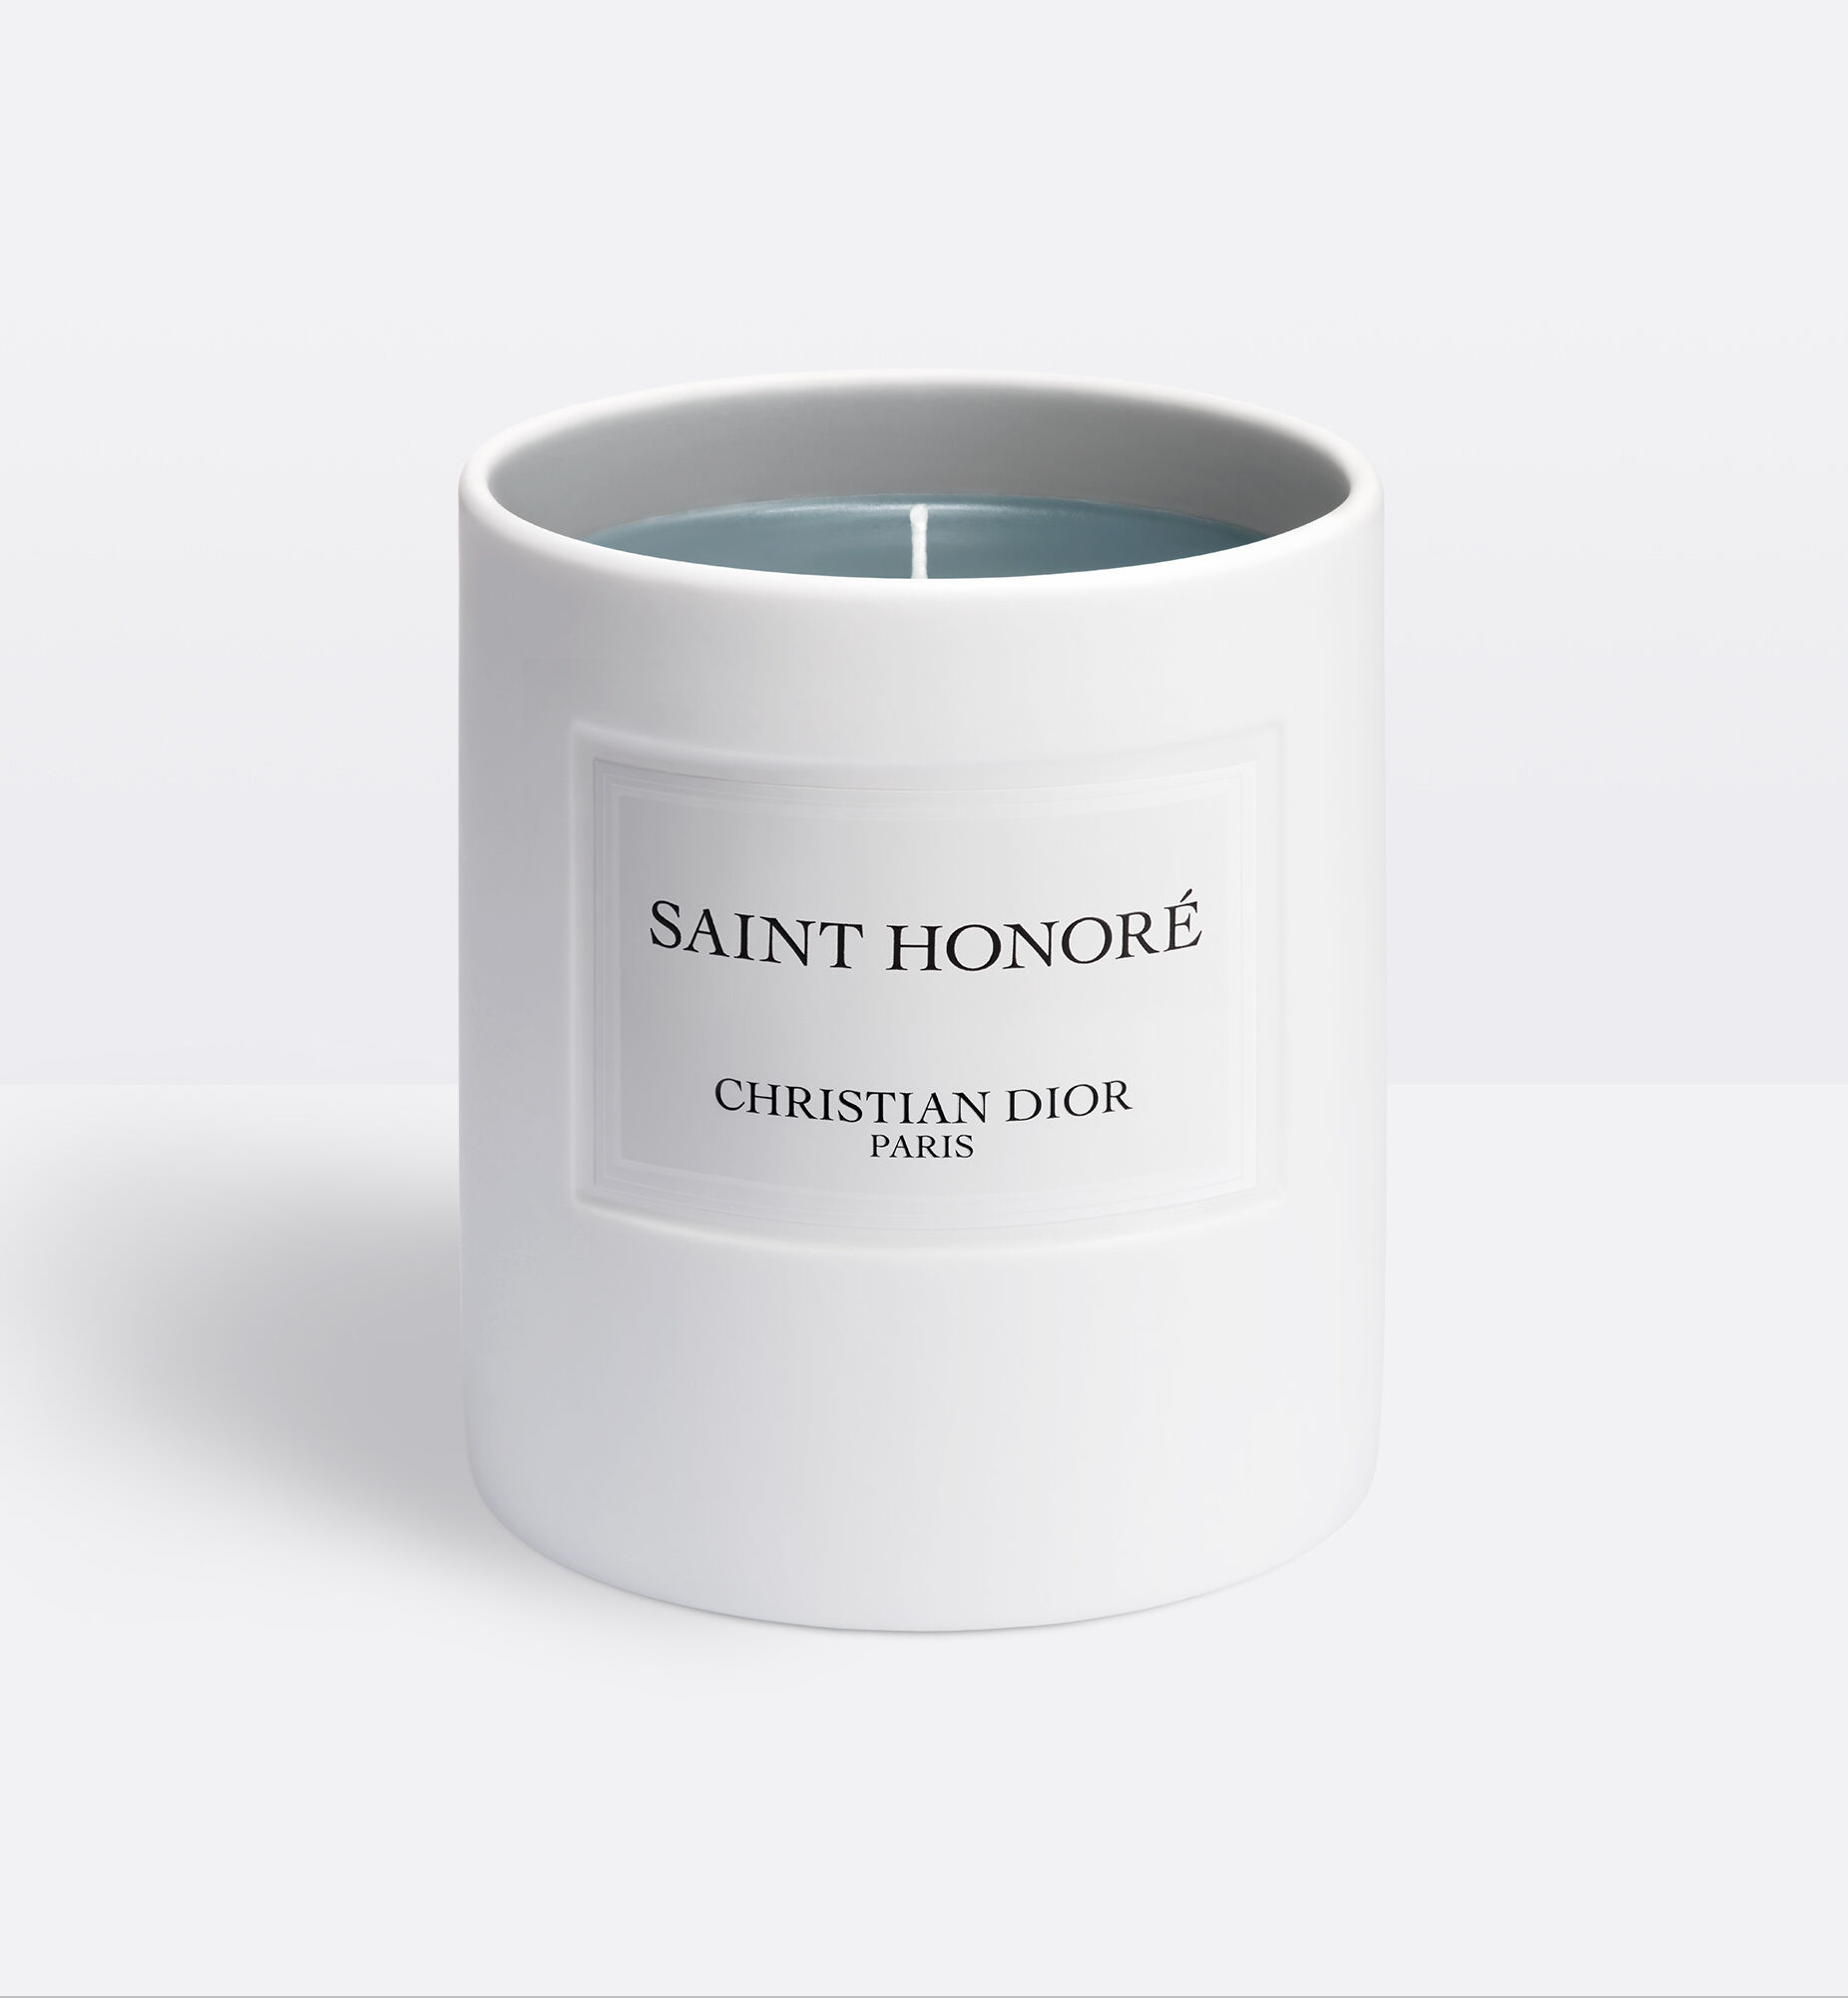 Scented Candle - Saint-Honoré: Fragrant Art of Living Candle | DIOR